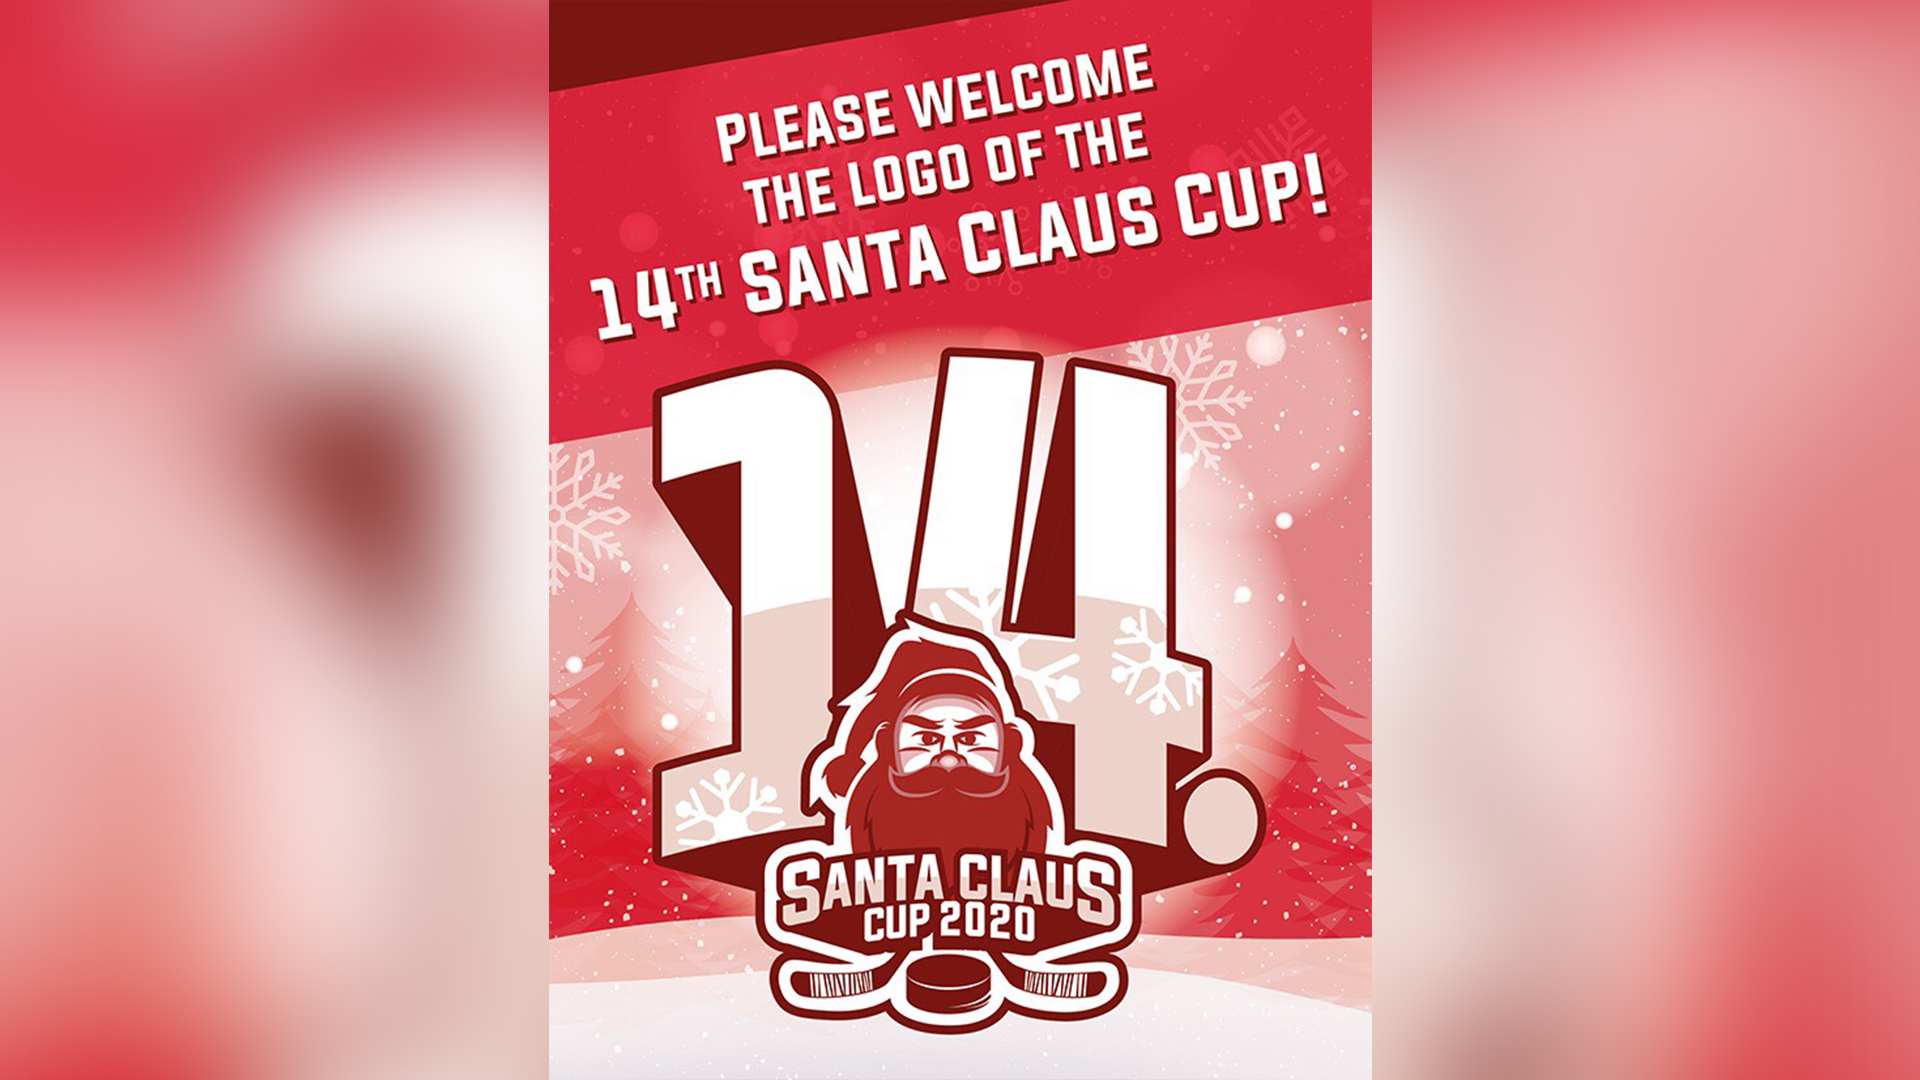 Welcome the logo of the 14th Santa Claus Cup!